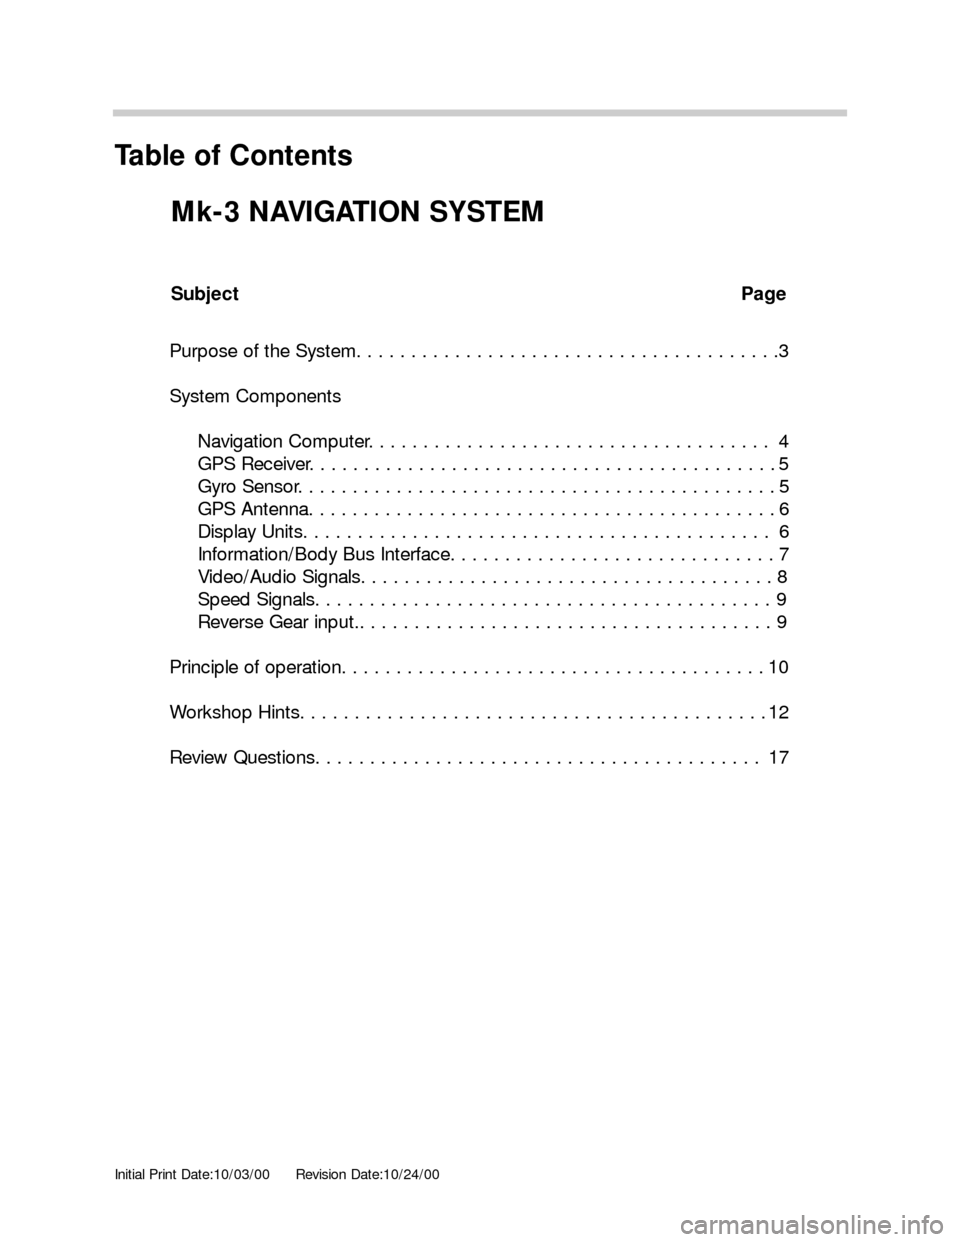 BMW 5 SERIES 2001 E39 Mk3 Navigation System Manual Initial Print Date:10/03/00Revision Date:10/24/00
Subject Page
Purpose of the System. . . . . . . . . . . . . . . . . . . . . . . . . . . . . . . . . . . . . . .3
System Components
Navigation Computer